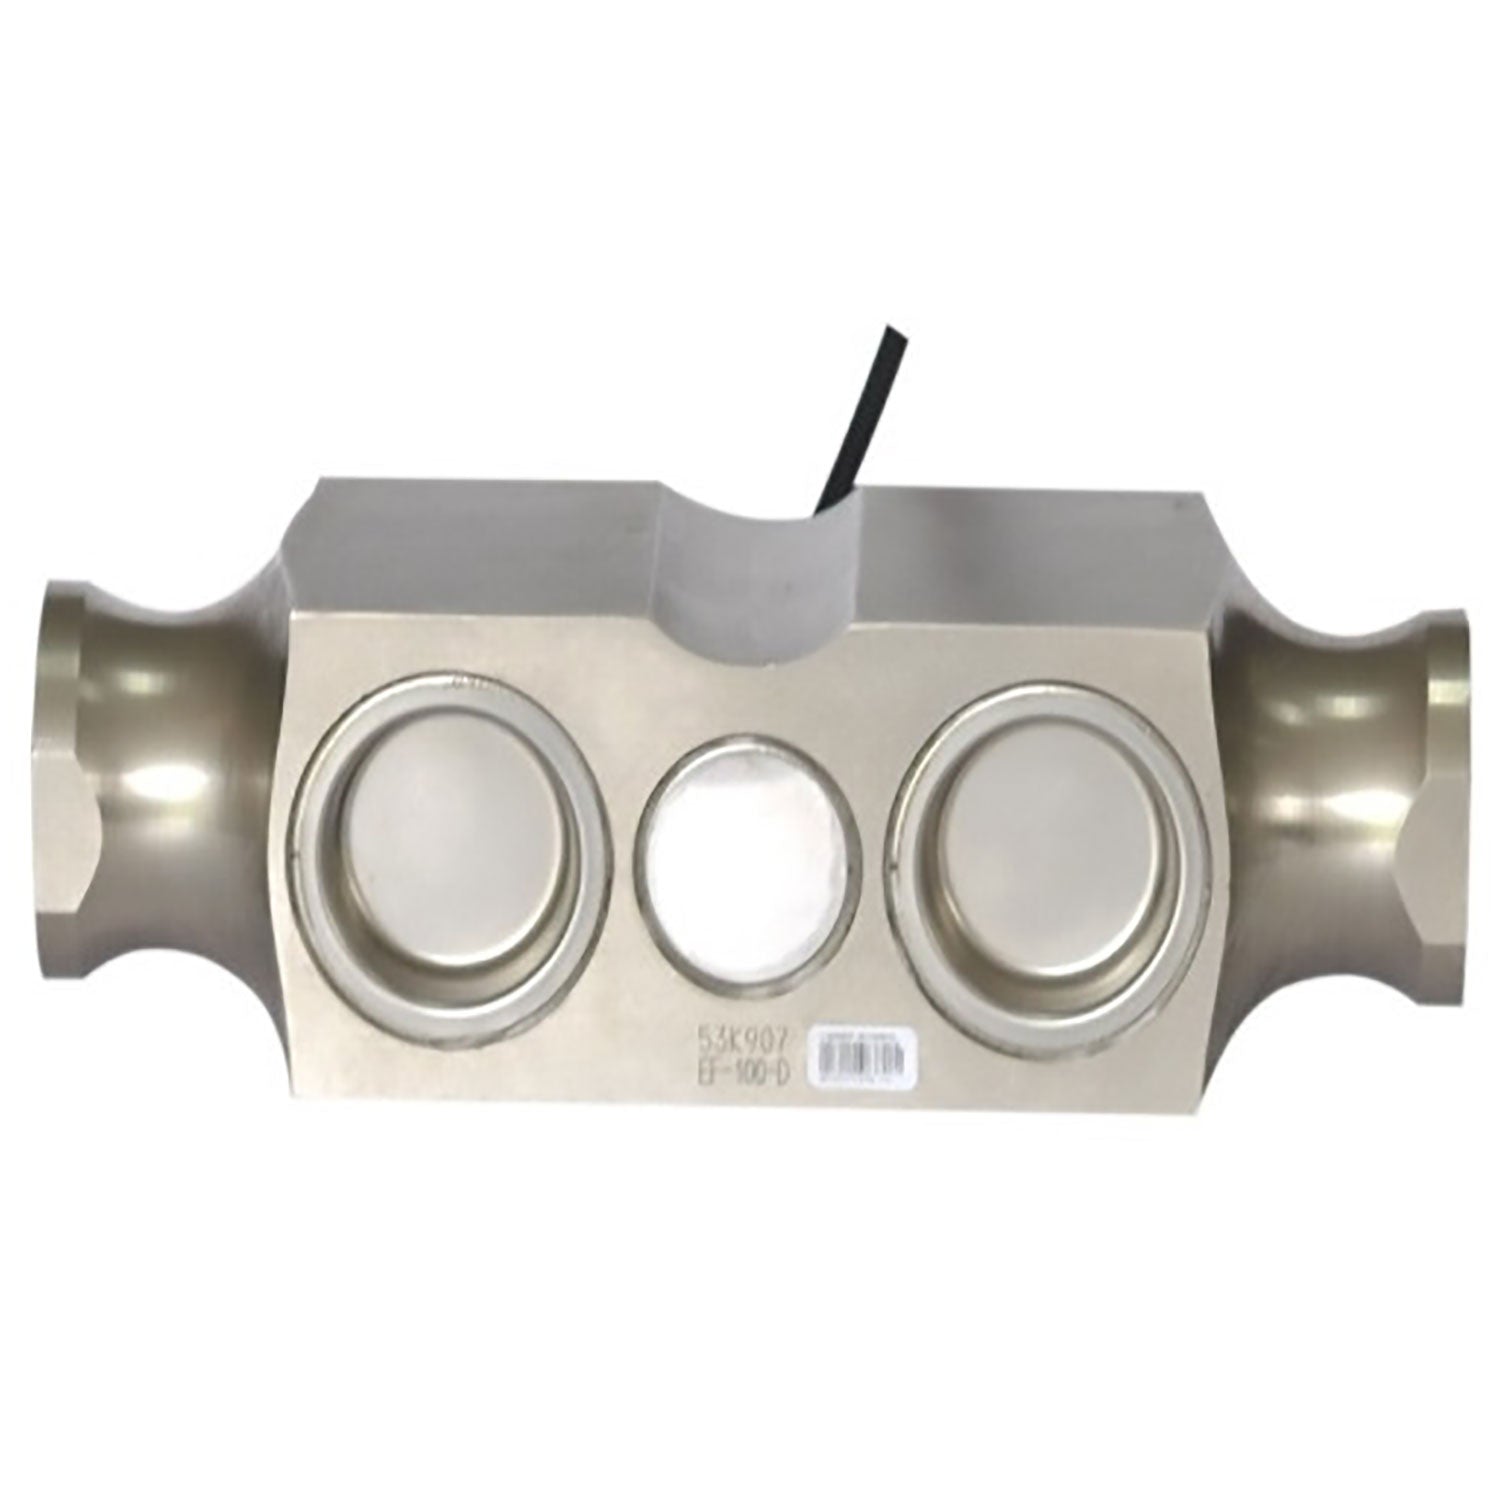 Keli QSF-A-50klb Alloy steel double ended load cell NTEP